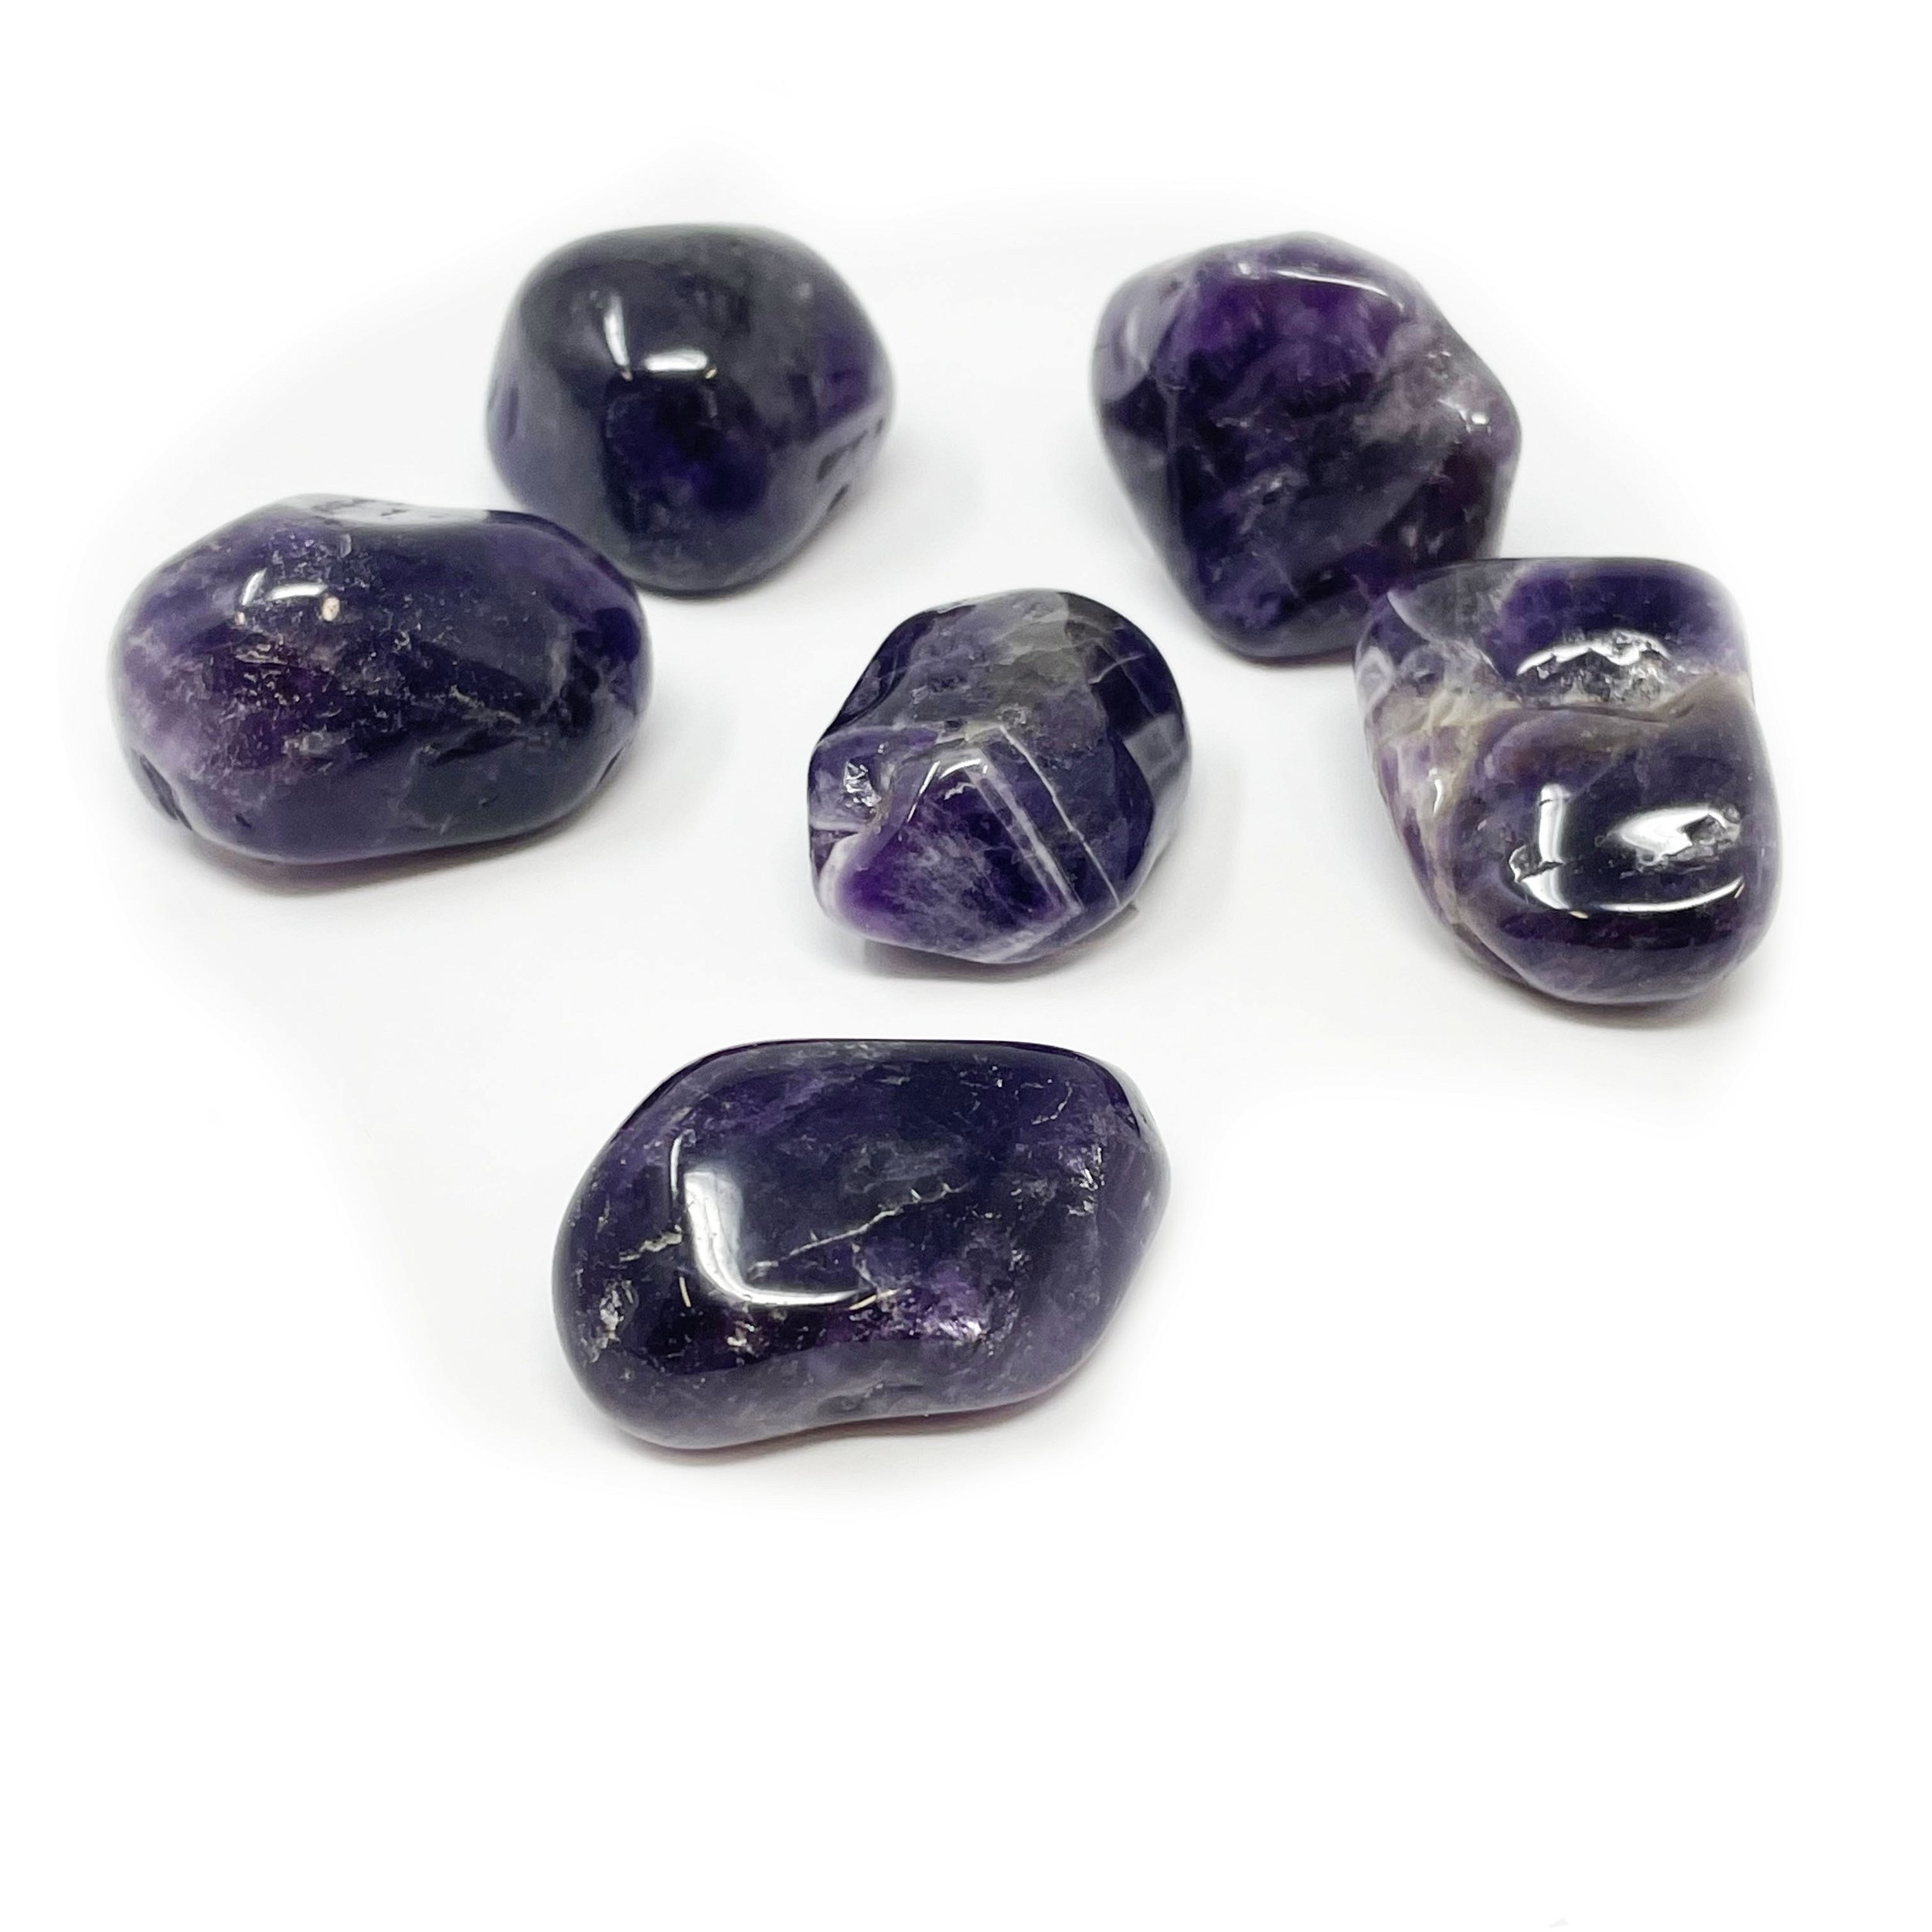 Tumbled Amethyst From Brazil (Singles)